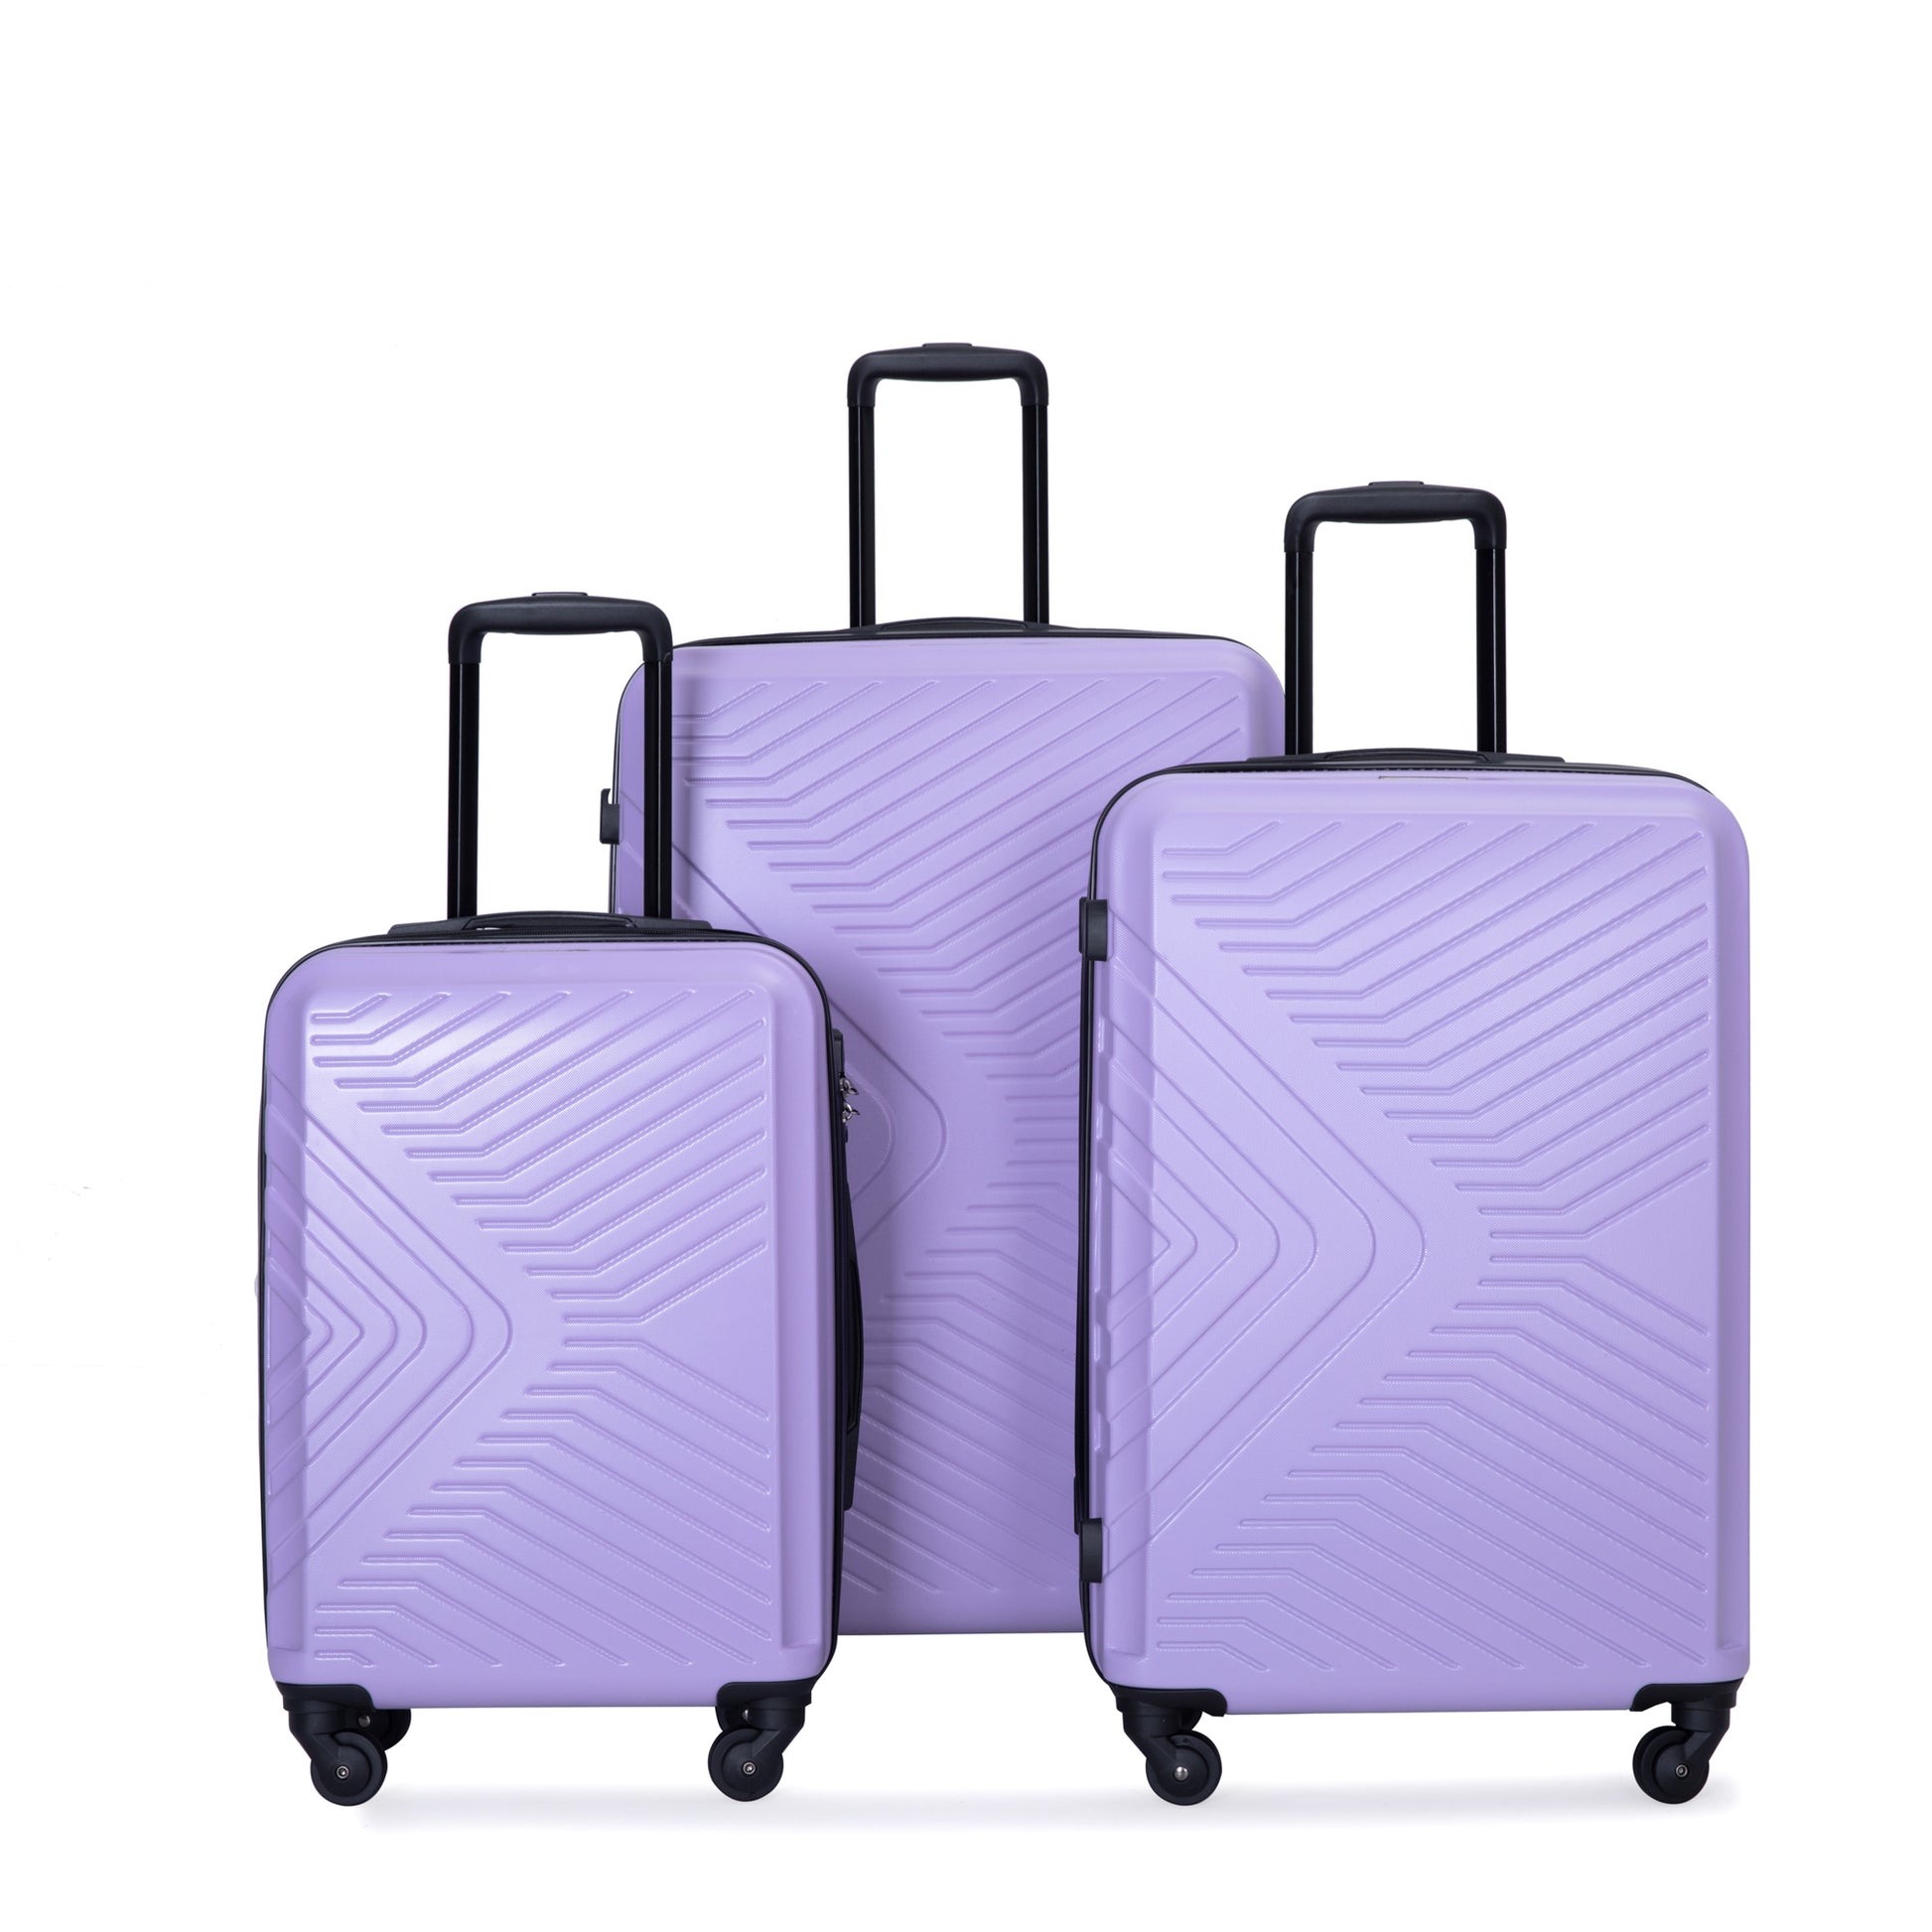 3 Piece Luggage Sets Abs Lightweight Suitcase